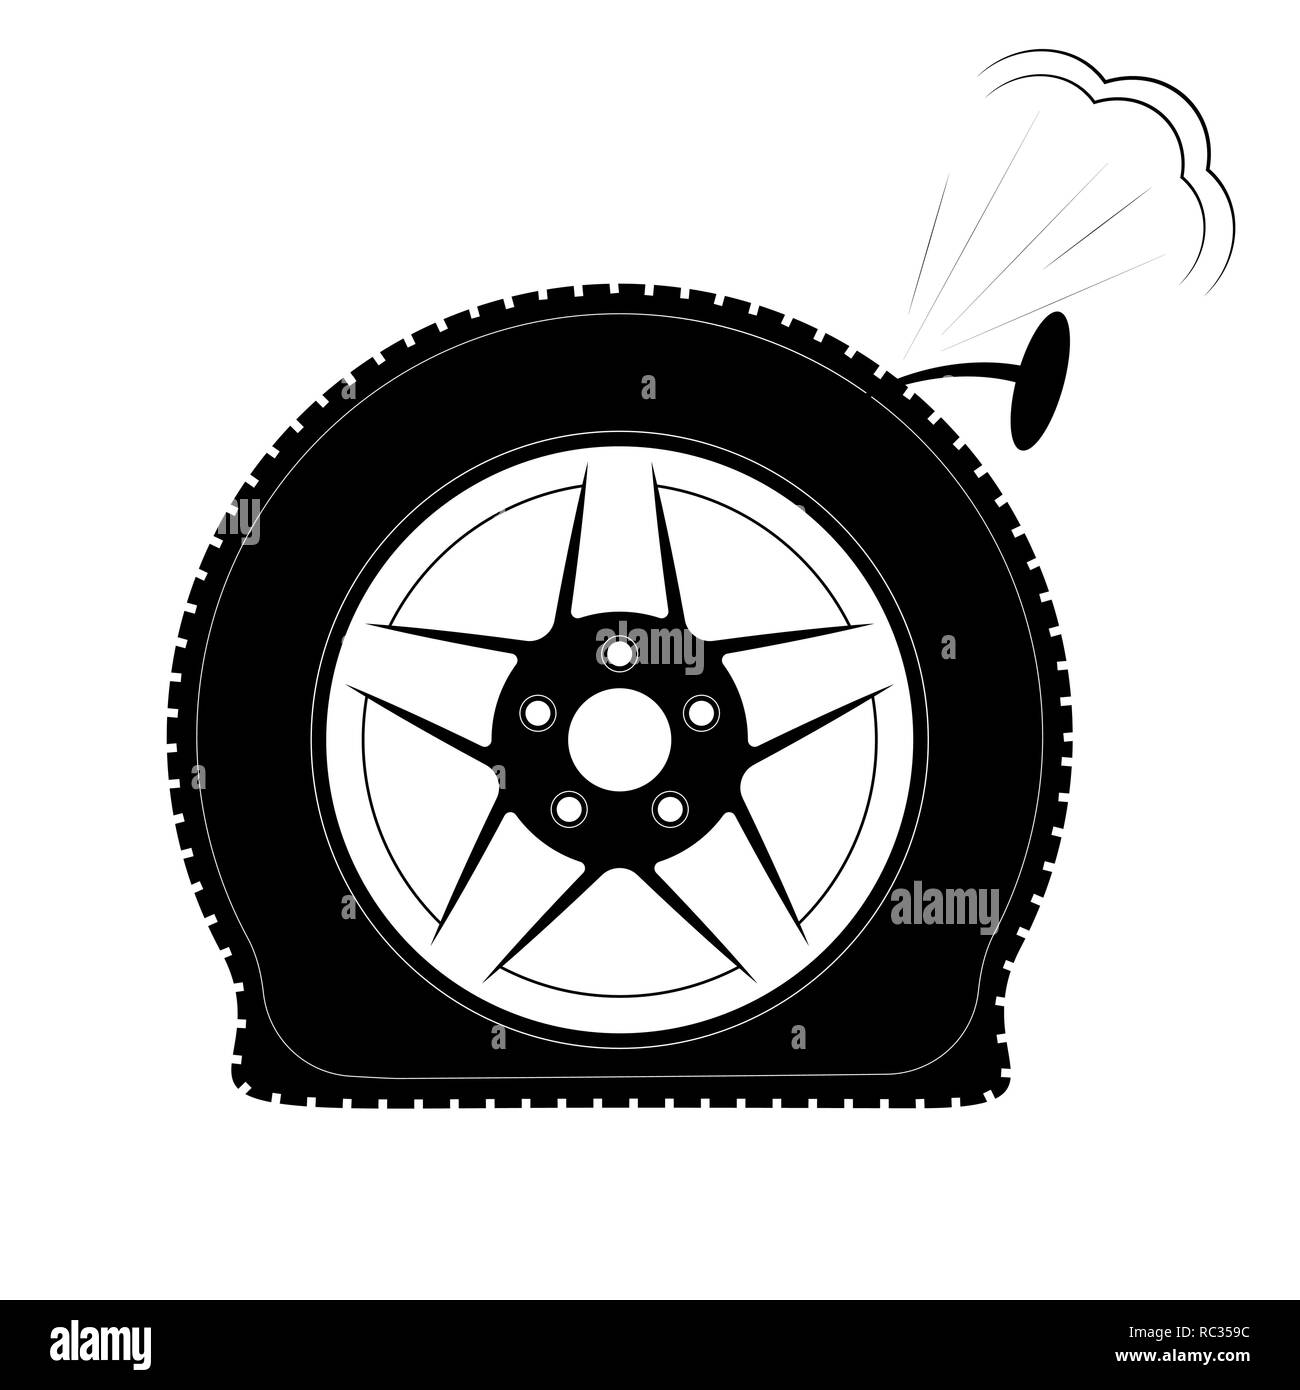 A flat tire or a punctured tire. Logo or emblem for tire fitting, shop or website Stock Vector